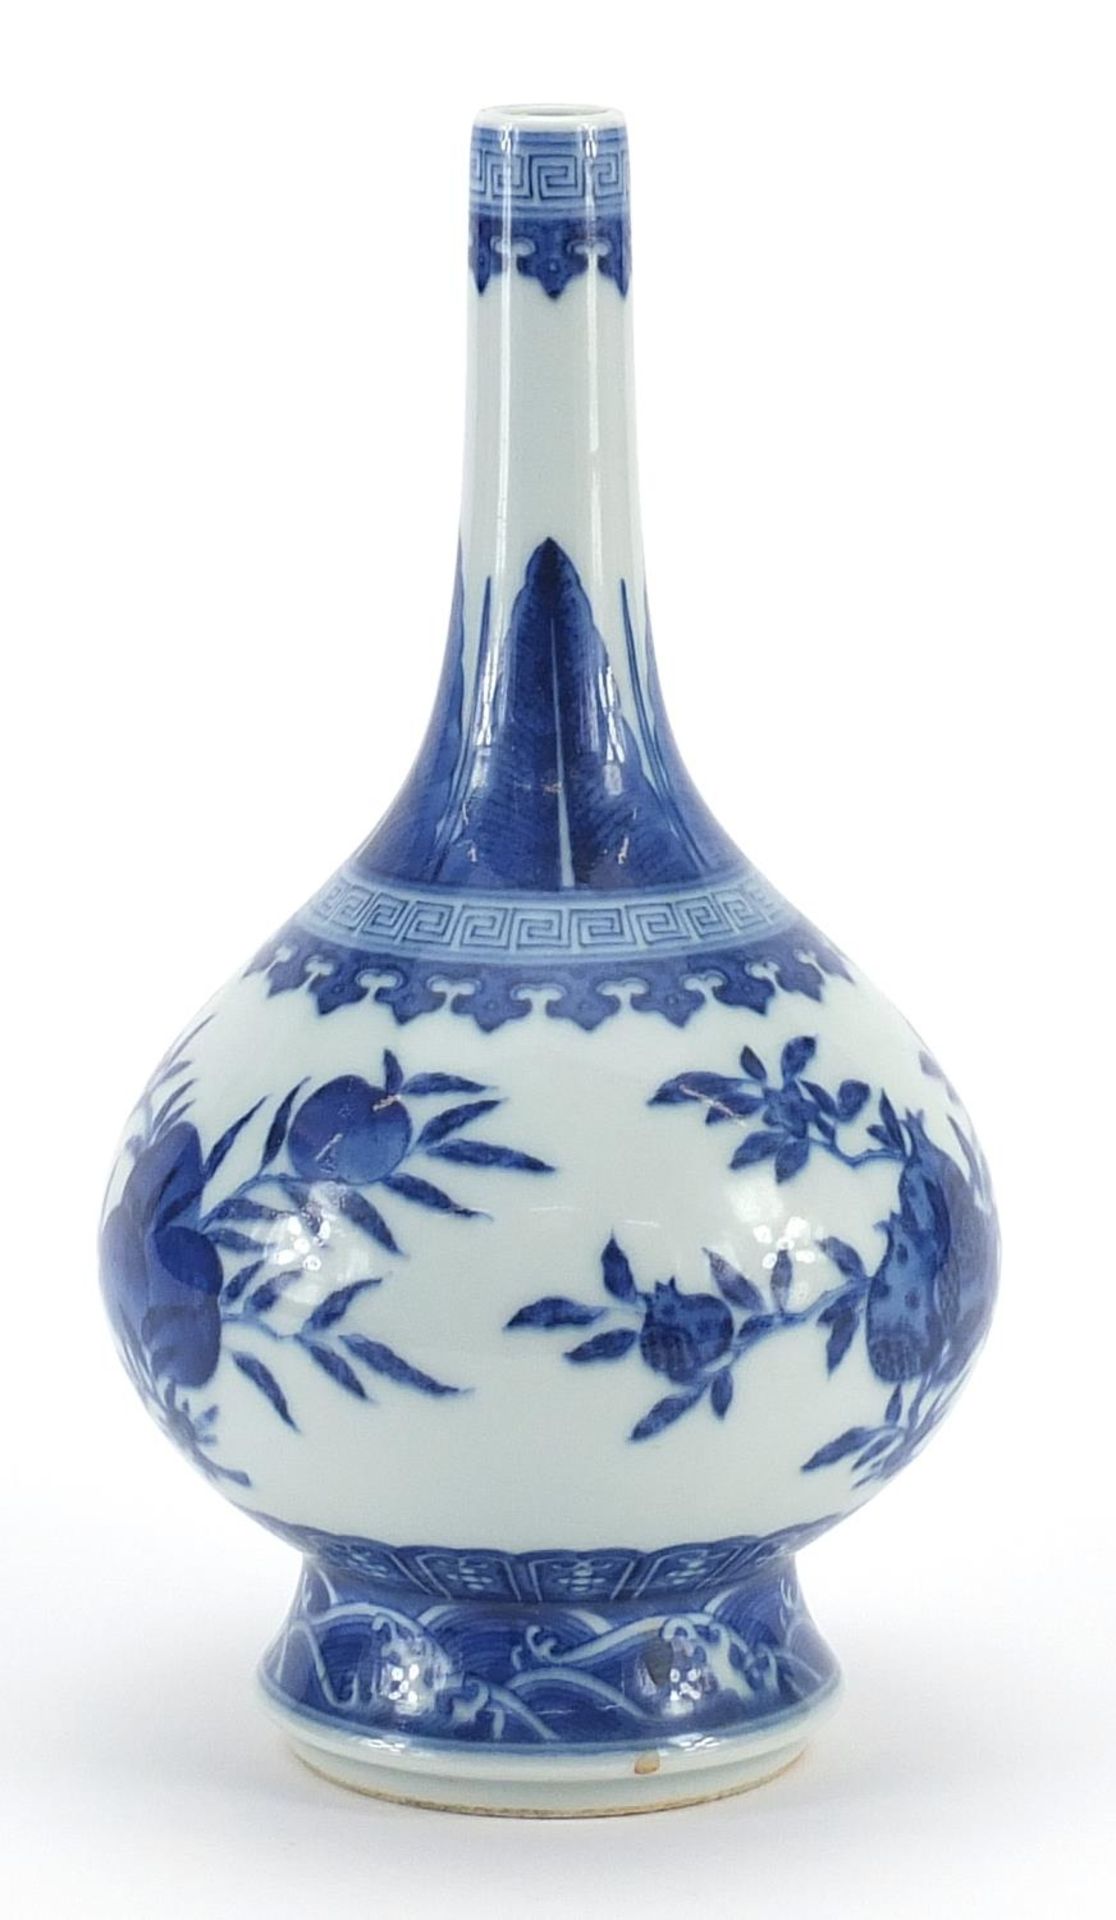 Chinese blue and white porcelain rosewater dropper hand painted with peaches, six figure character - Image 2 of 3